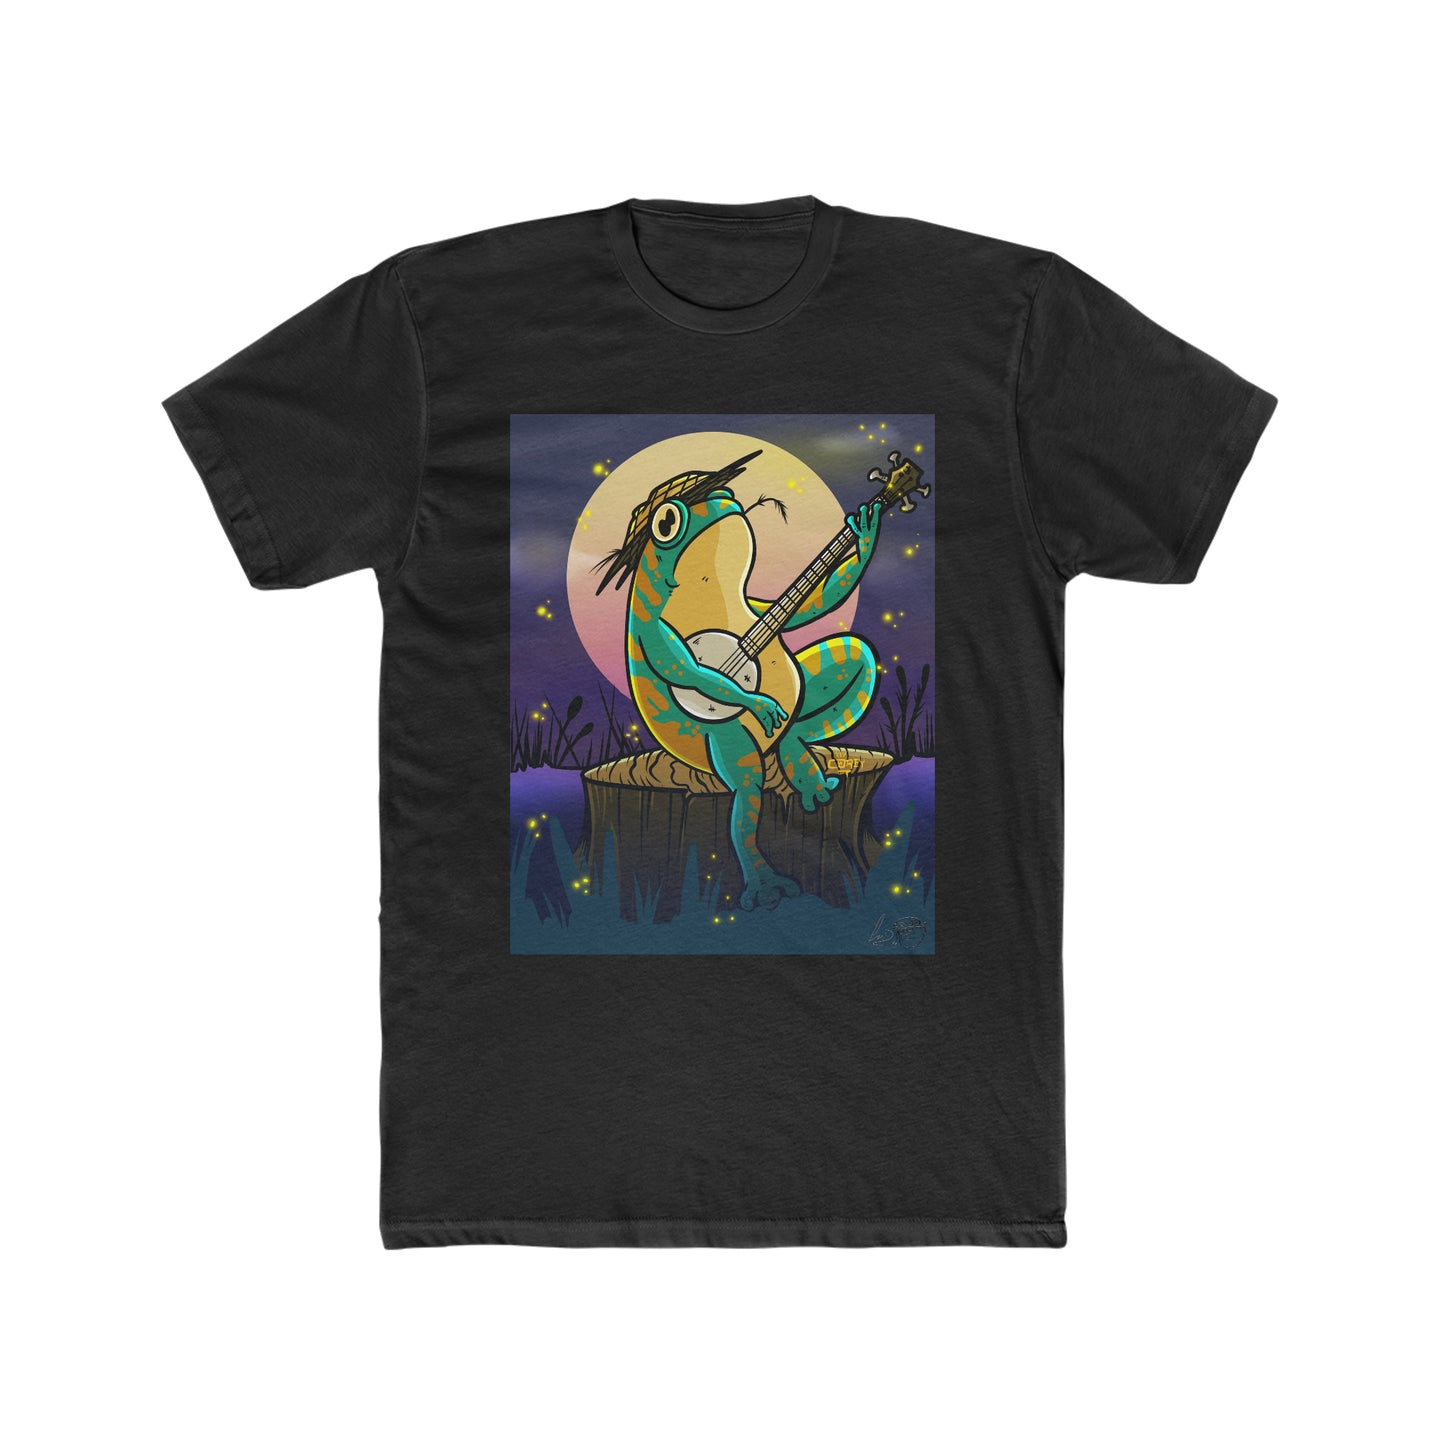 Down a time or two Swamp Full Art Tee